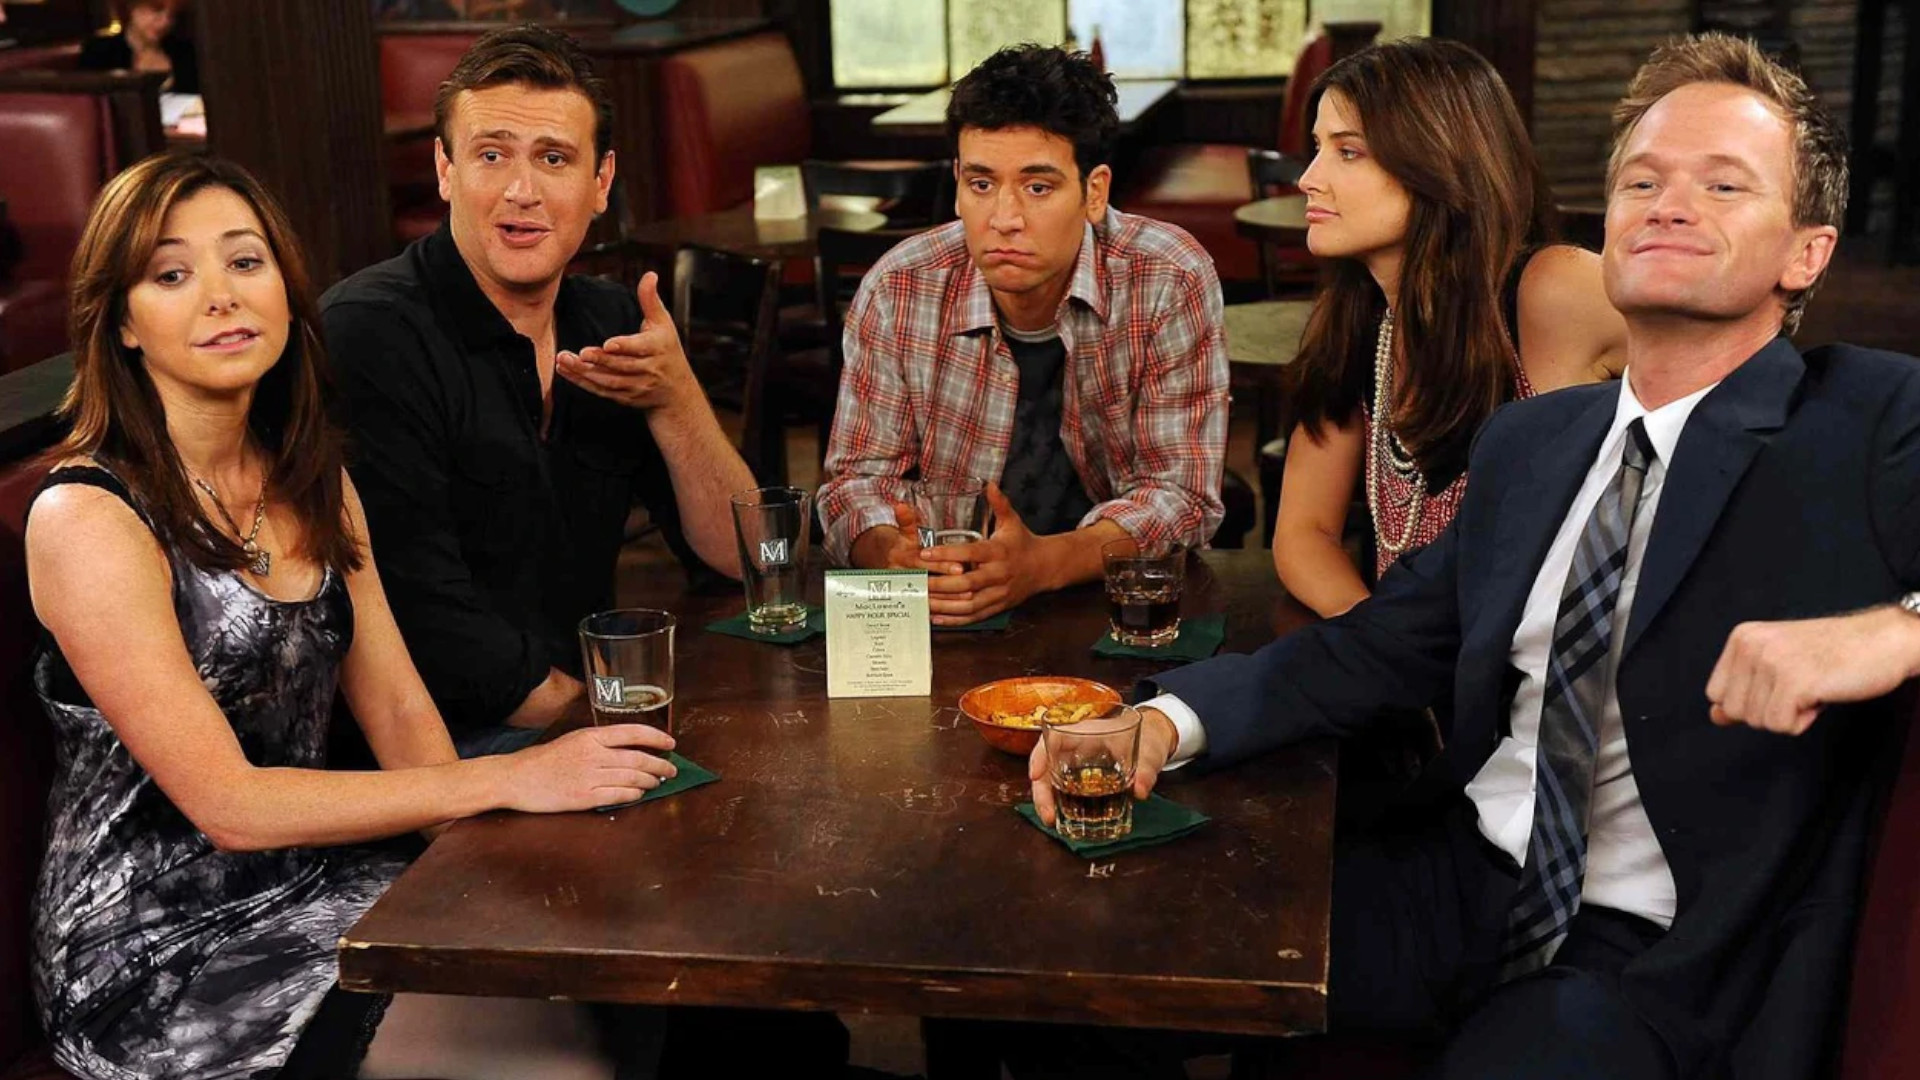 How I Met Your Mother cast where are they now? The Digital Fix